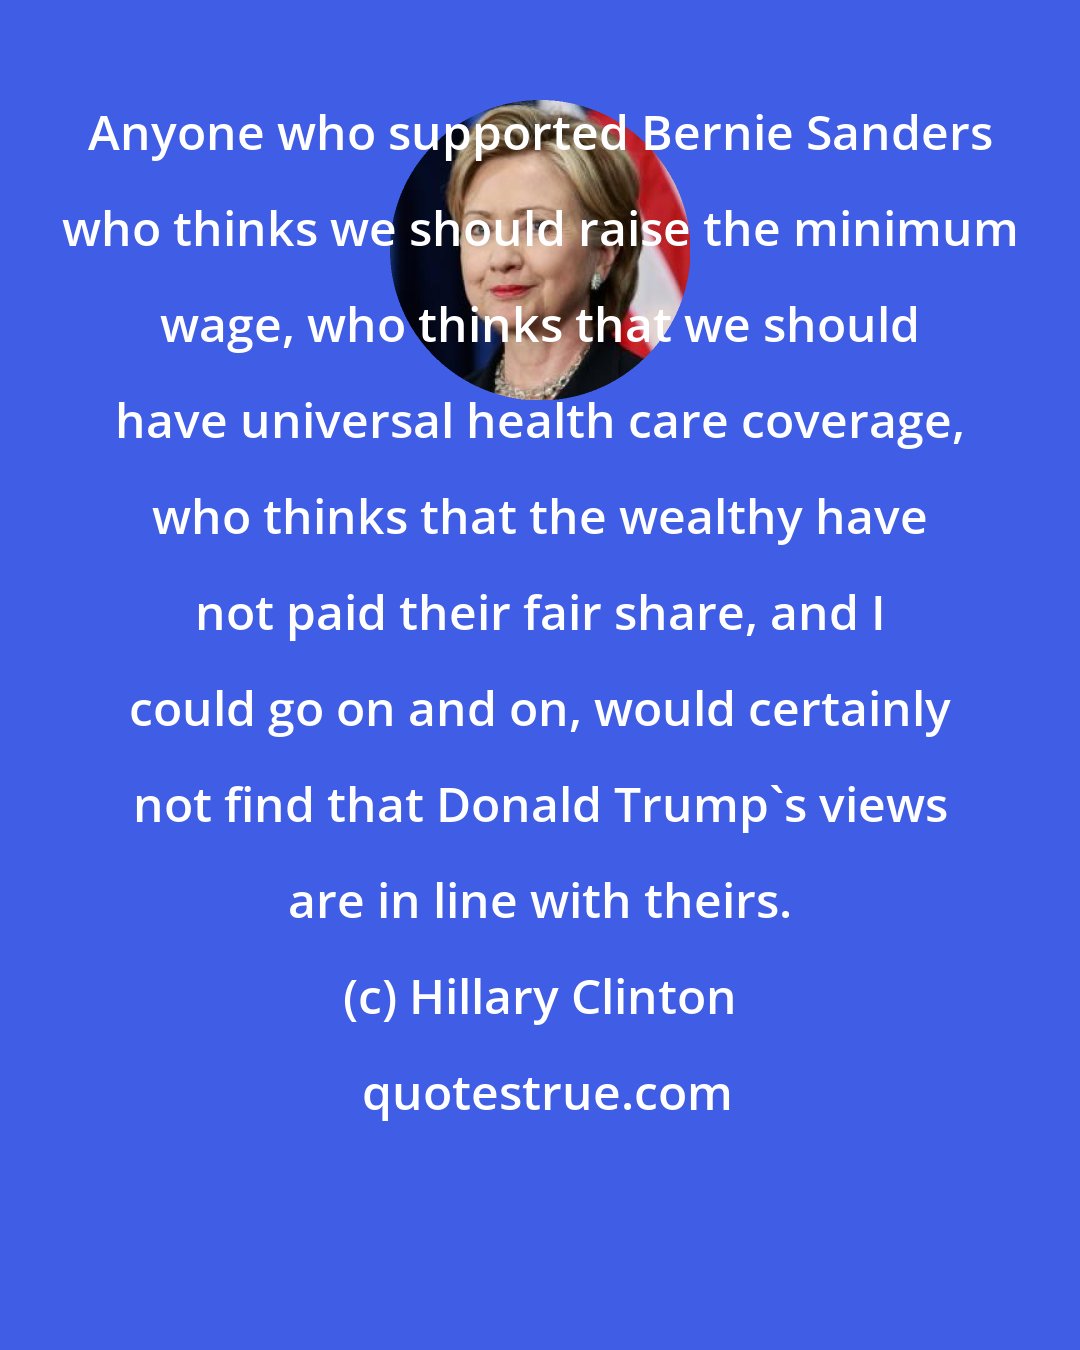 Hillary Clinton: Anyone who supported Bernie Sanders who thinks we should raise the minimum wage, who thinks that we should have universal health care coverage, who thinks that the wealthy have not paid their fair share, and I could go on and on, would certainly not find that Donald Trump's views are in line with theirs.